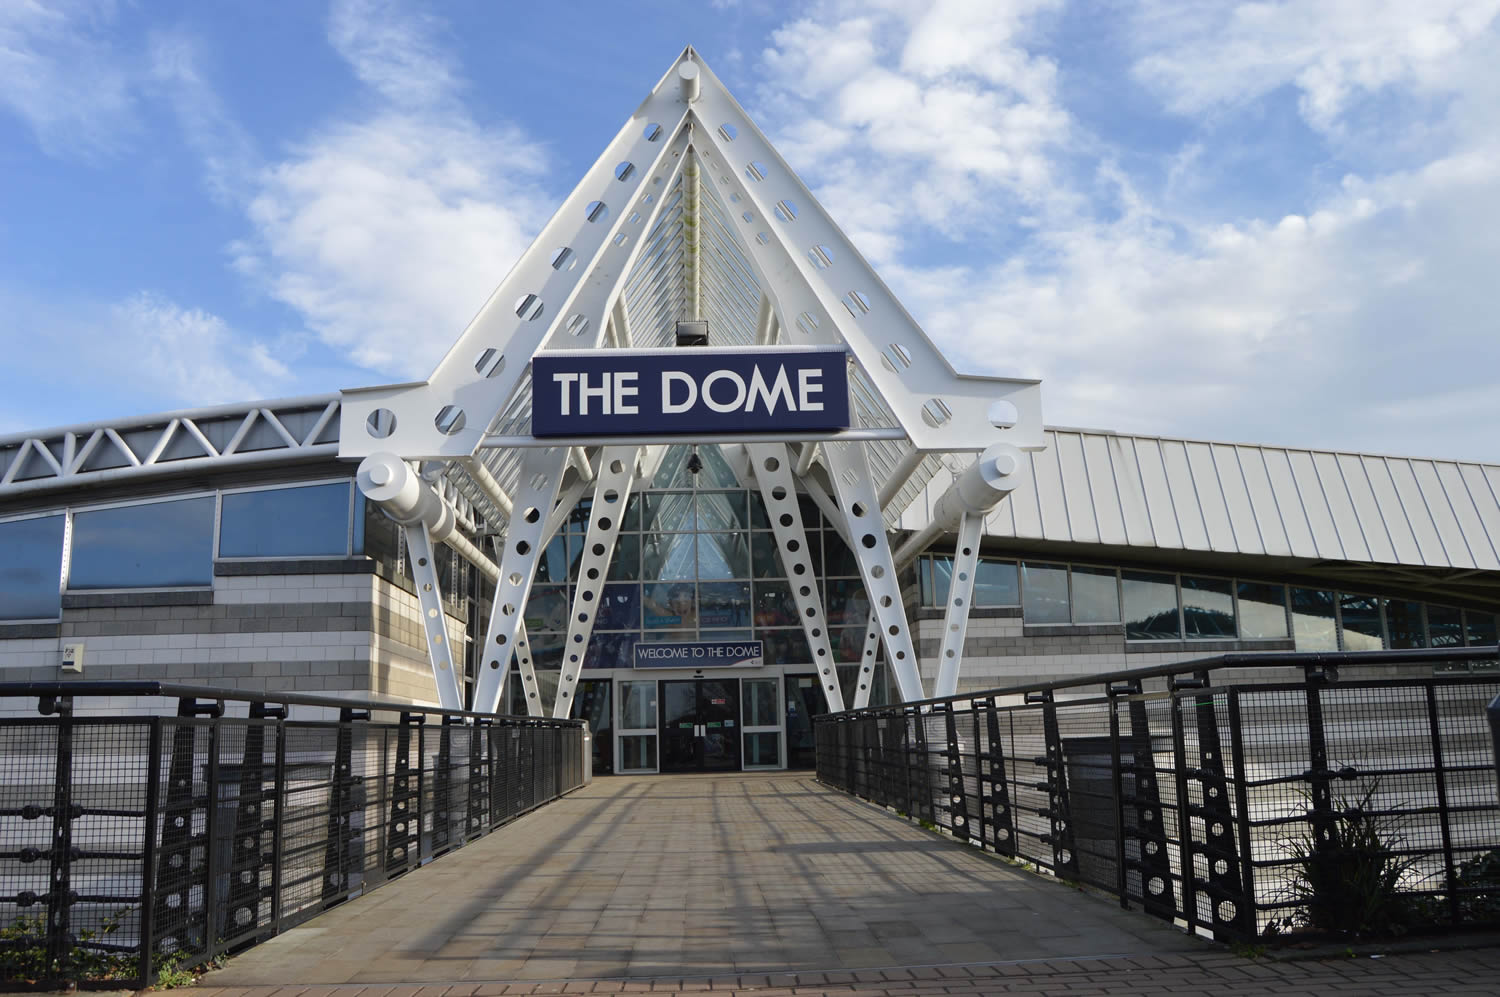 Image name Doncaster Dome the 2 image from the post Visitor Attractions in Yorkshire.com.